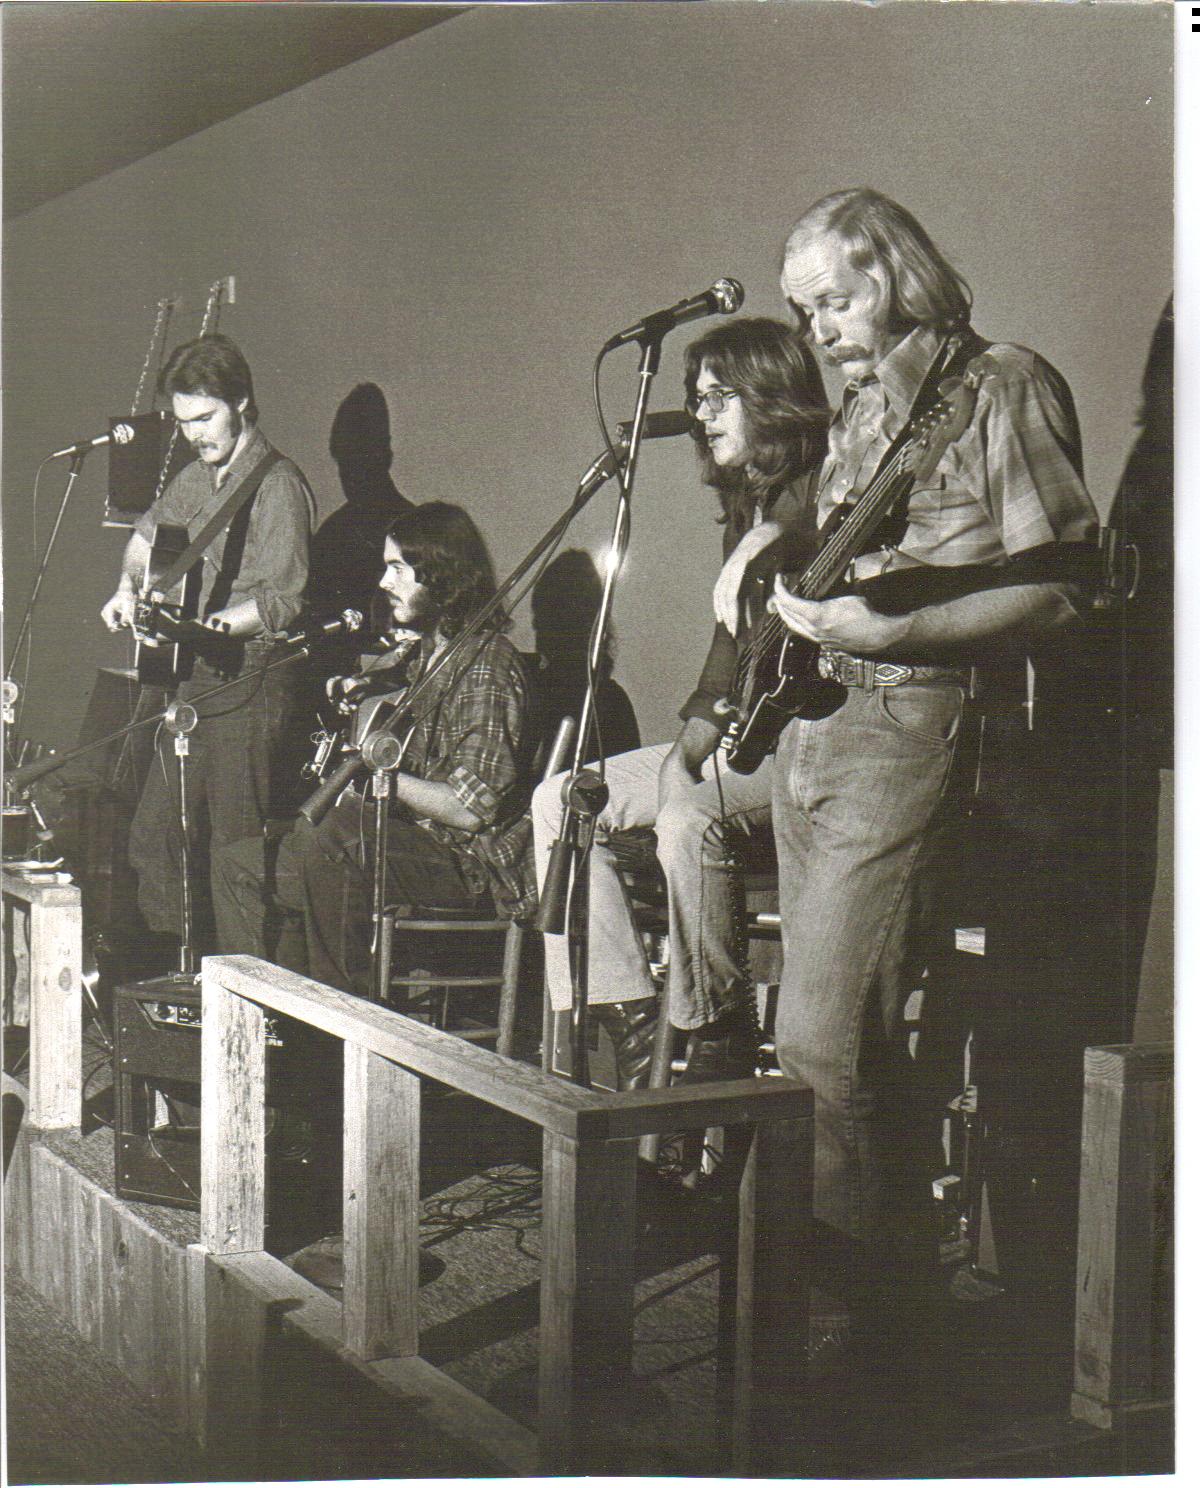 The Full Circle Band @ Mississippi Whiskers, Fall 1974